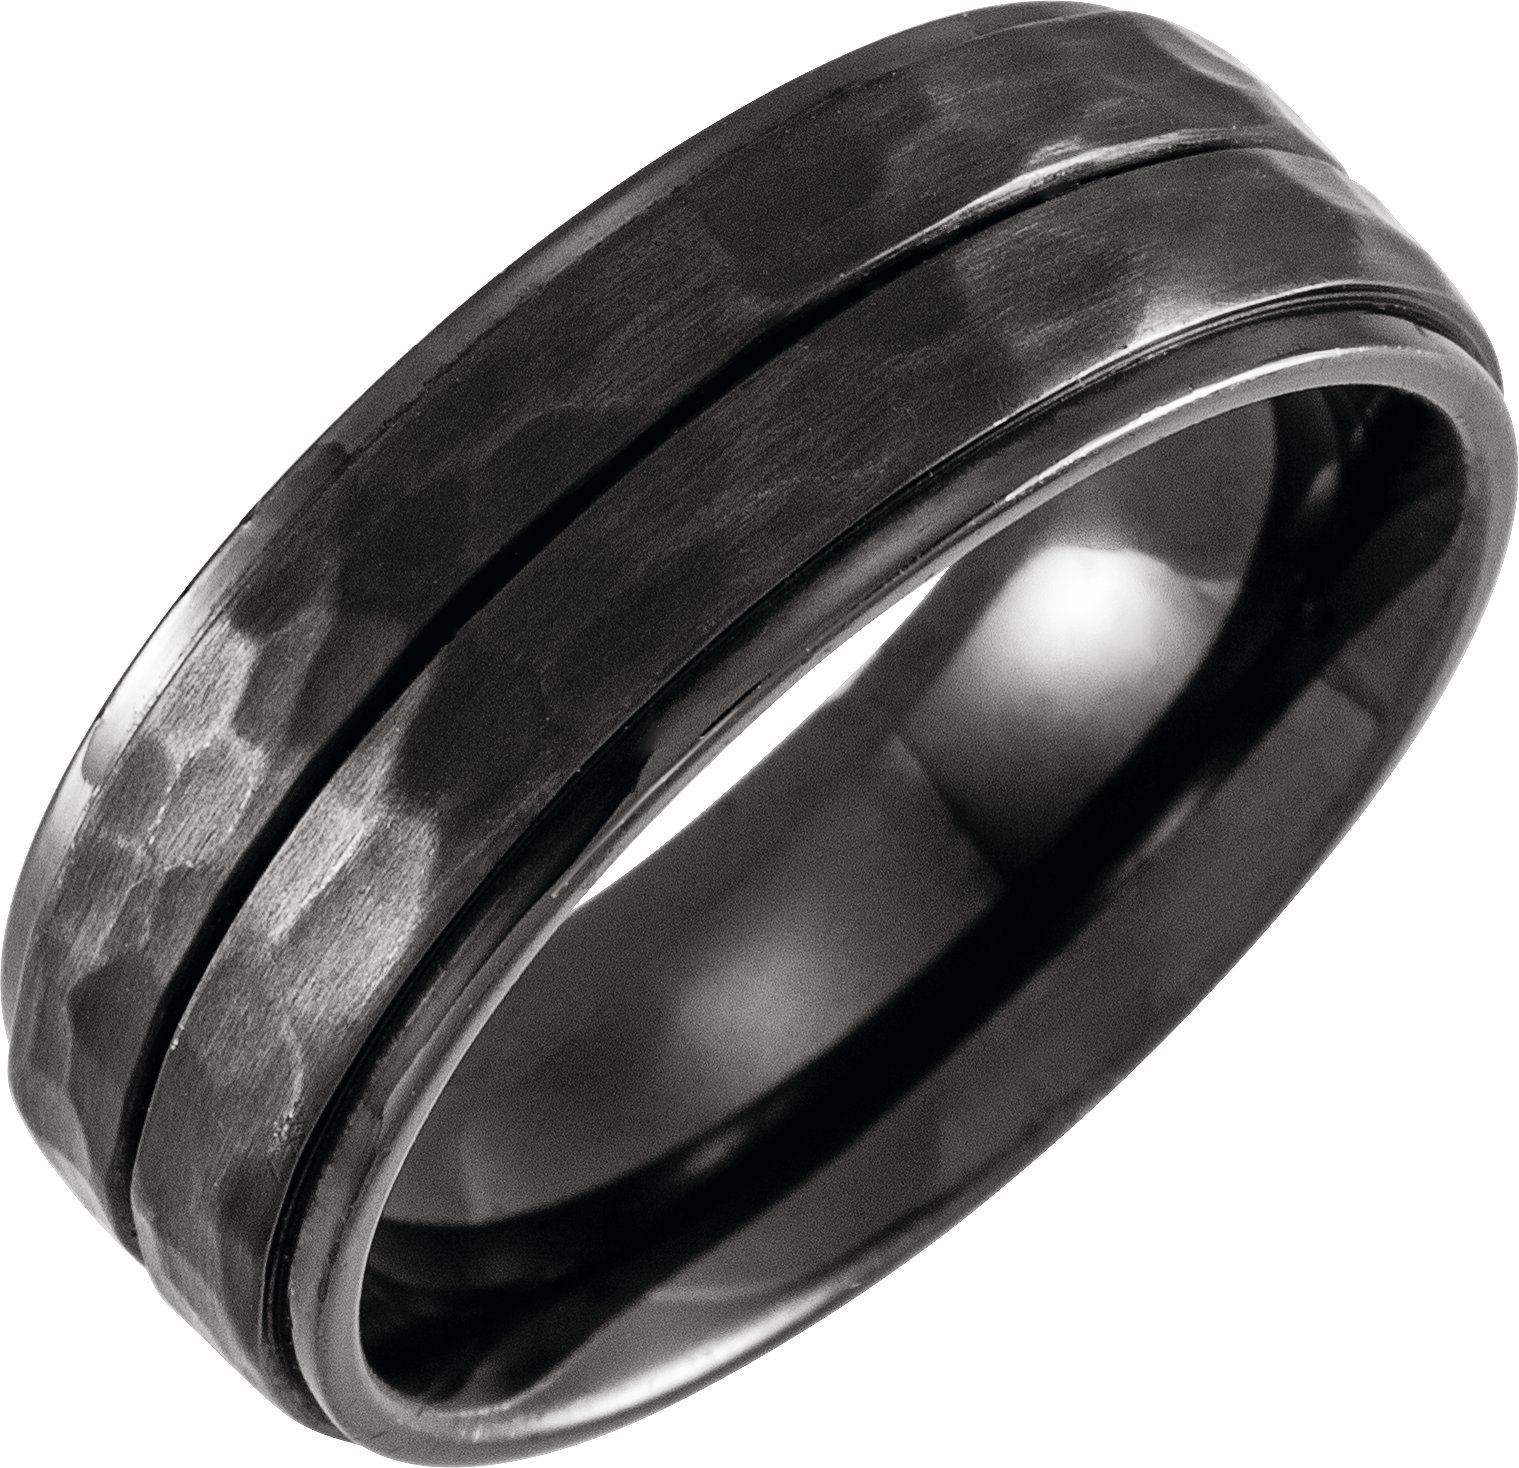 Black Titanium 8 mm Flat Grooved Stepped Hammered Band Size 9.5